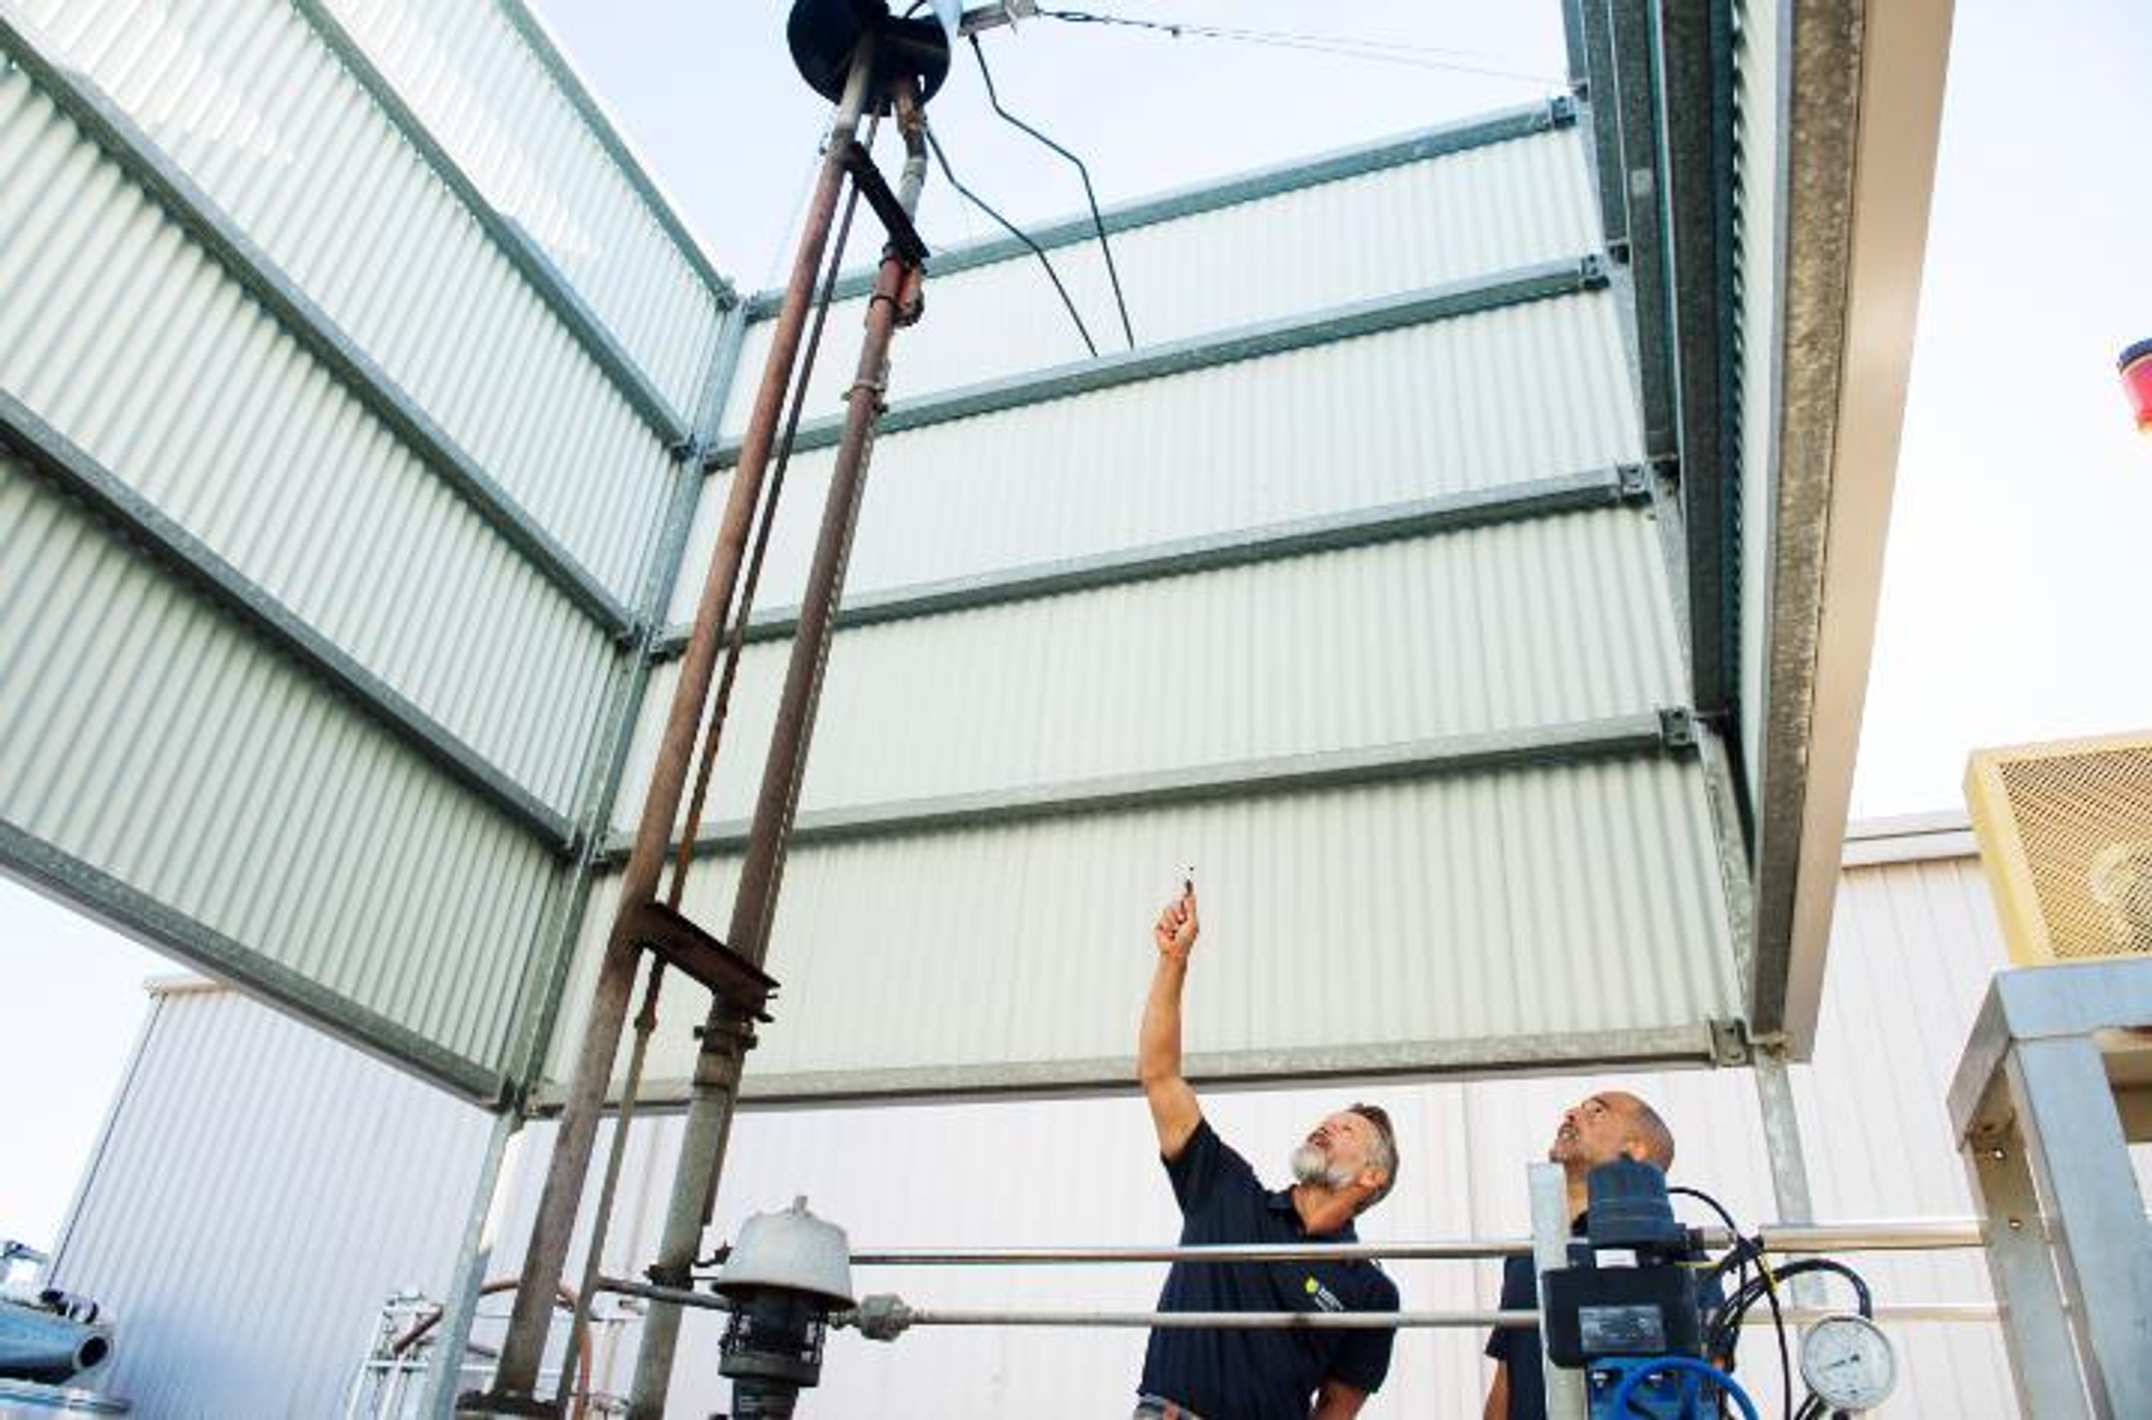 Two men inside a facility and looking up at equipment